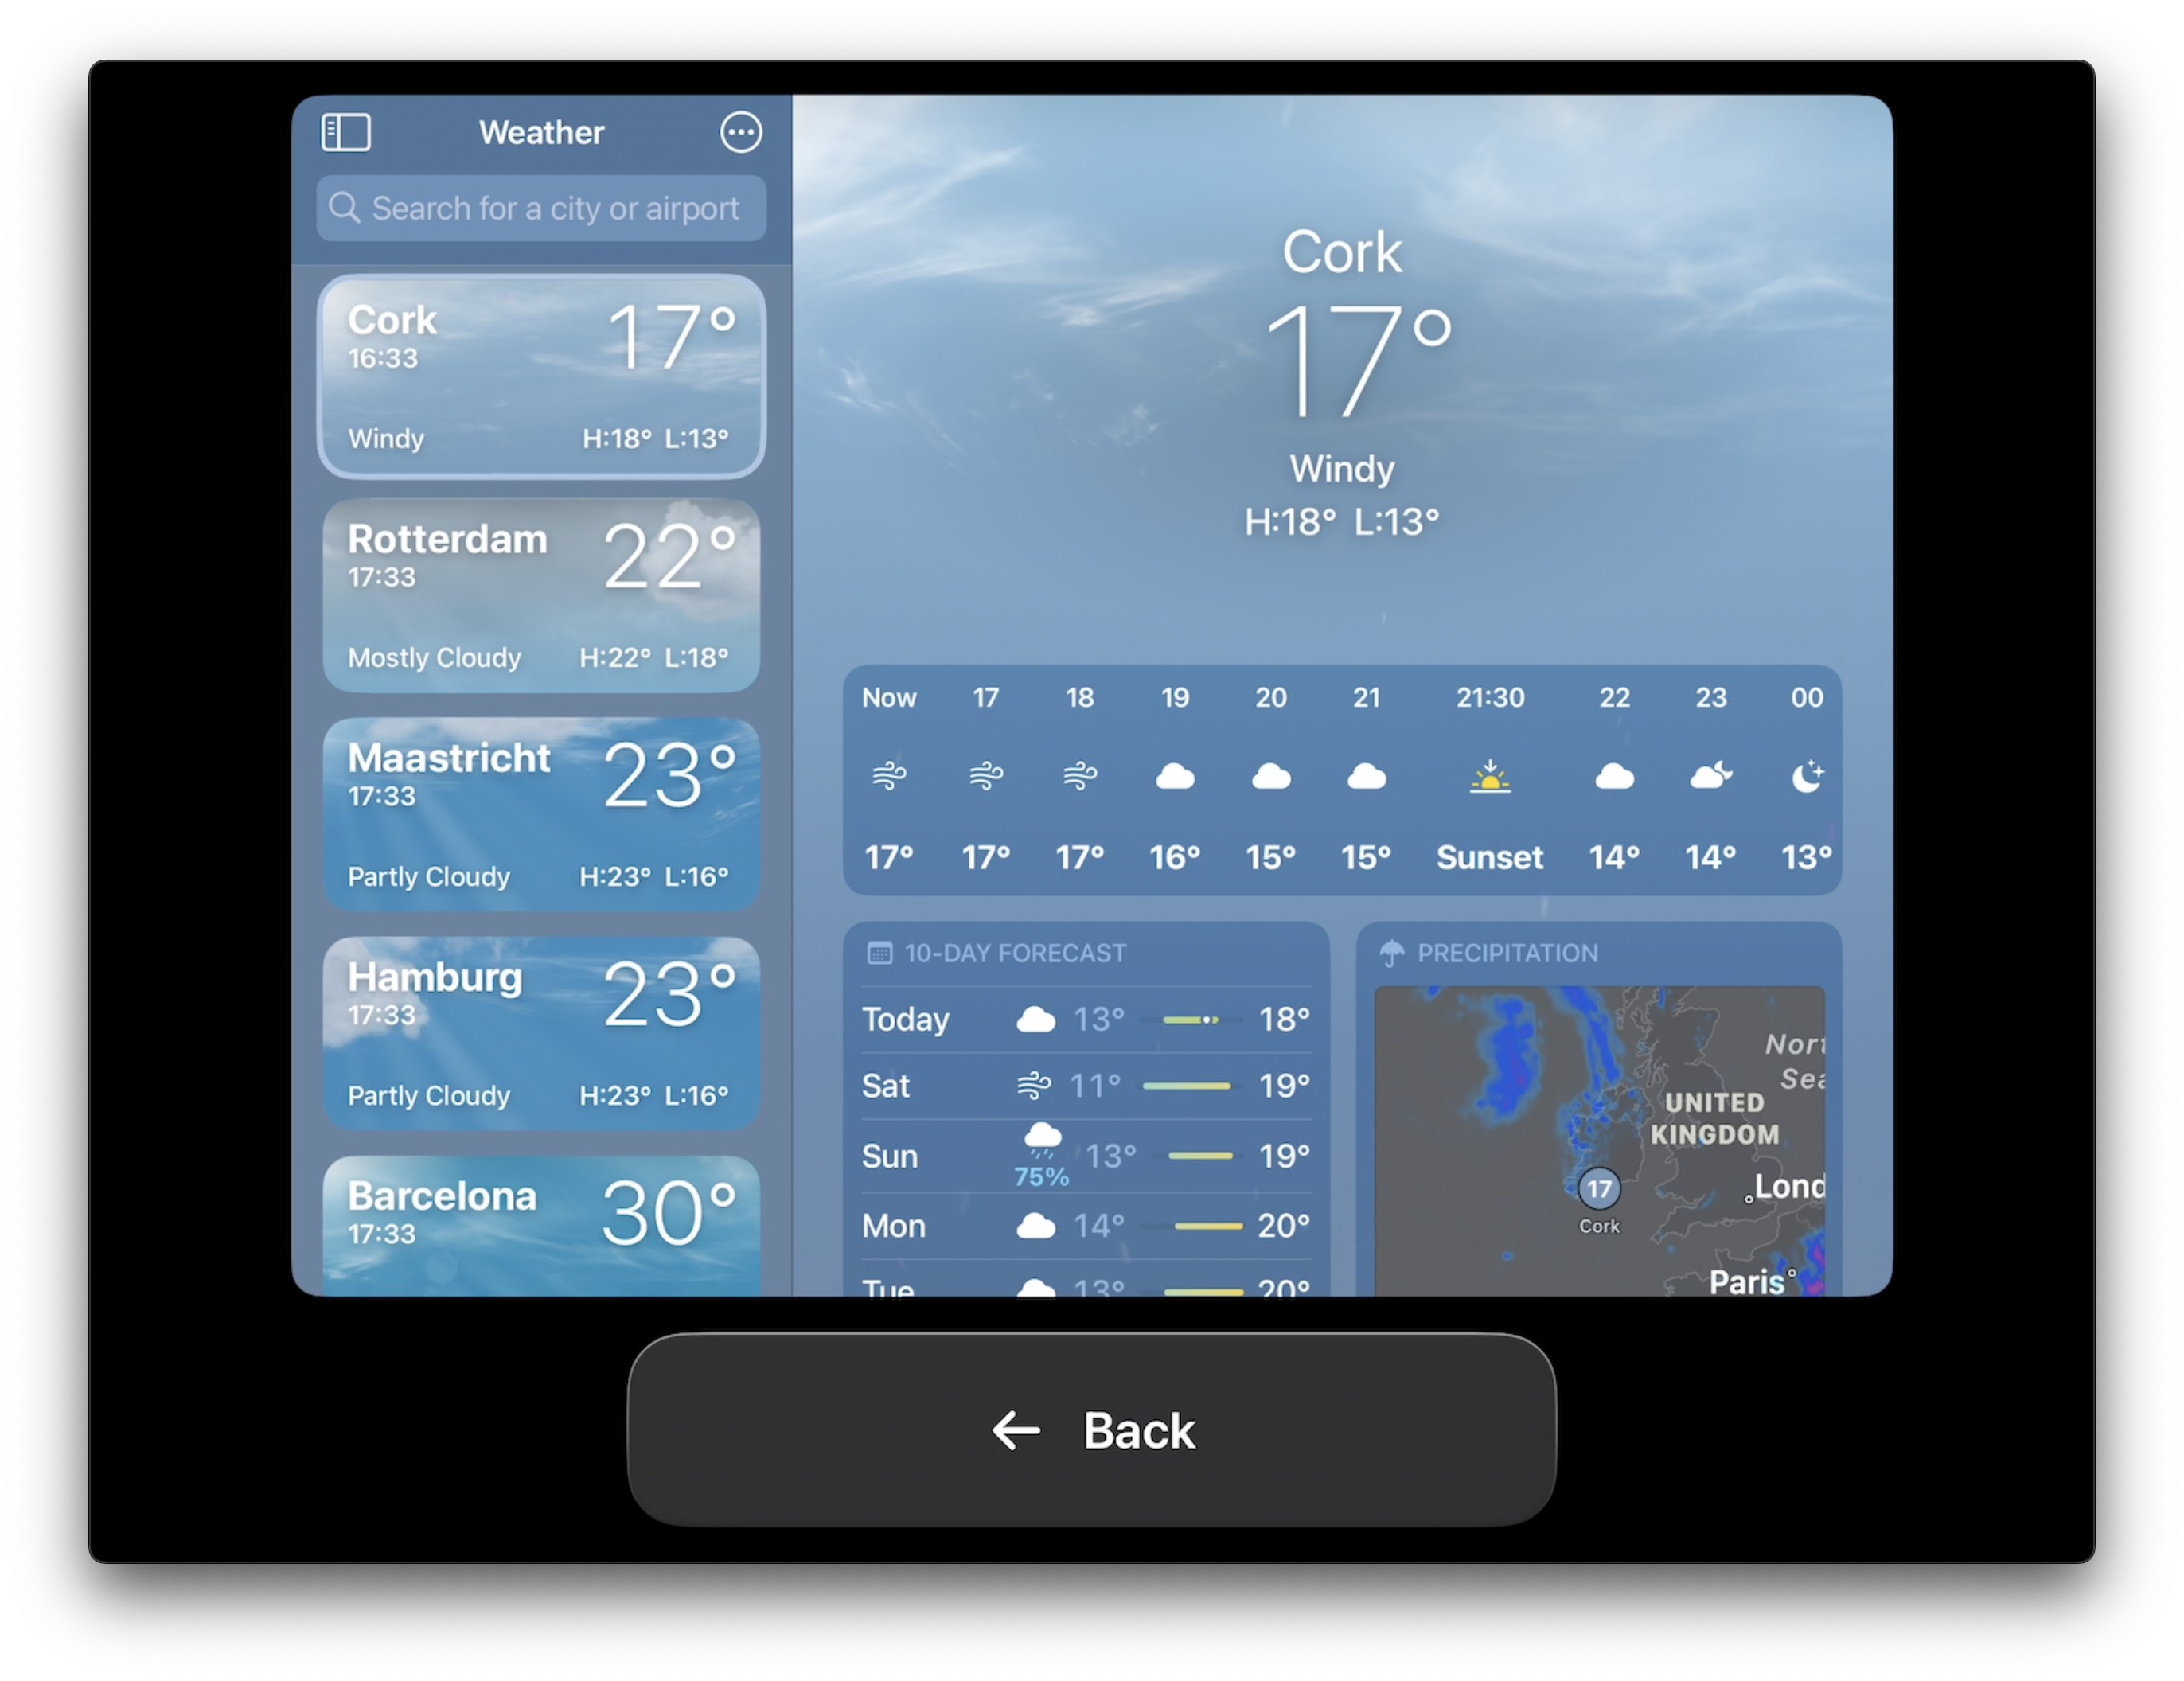 An iPad in landscape mode showing the (non-optimized) Weather app. It shows the Weather app as normal with a large "Back" button beneath its UI.